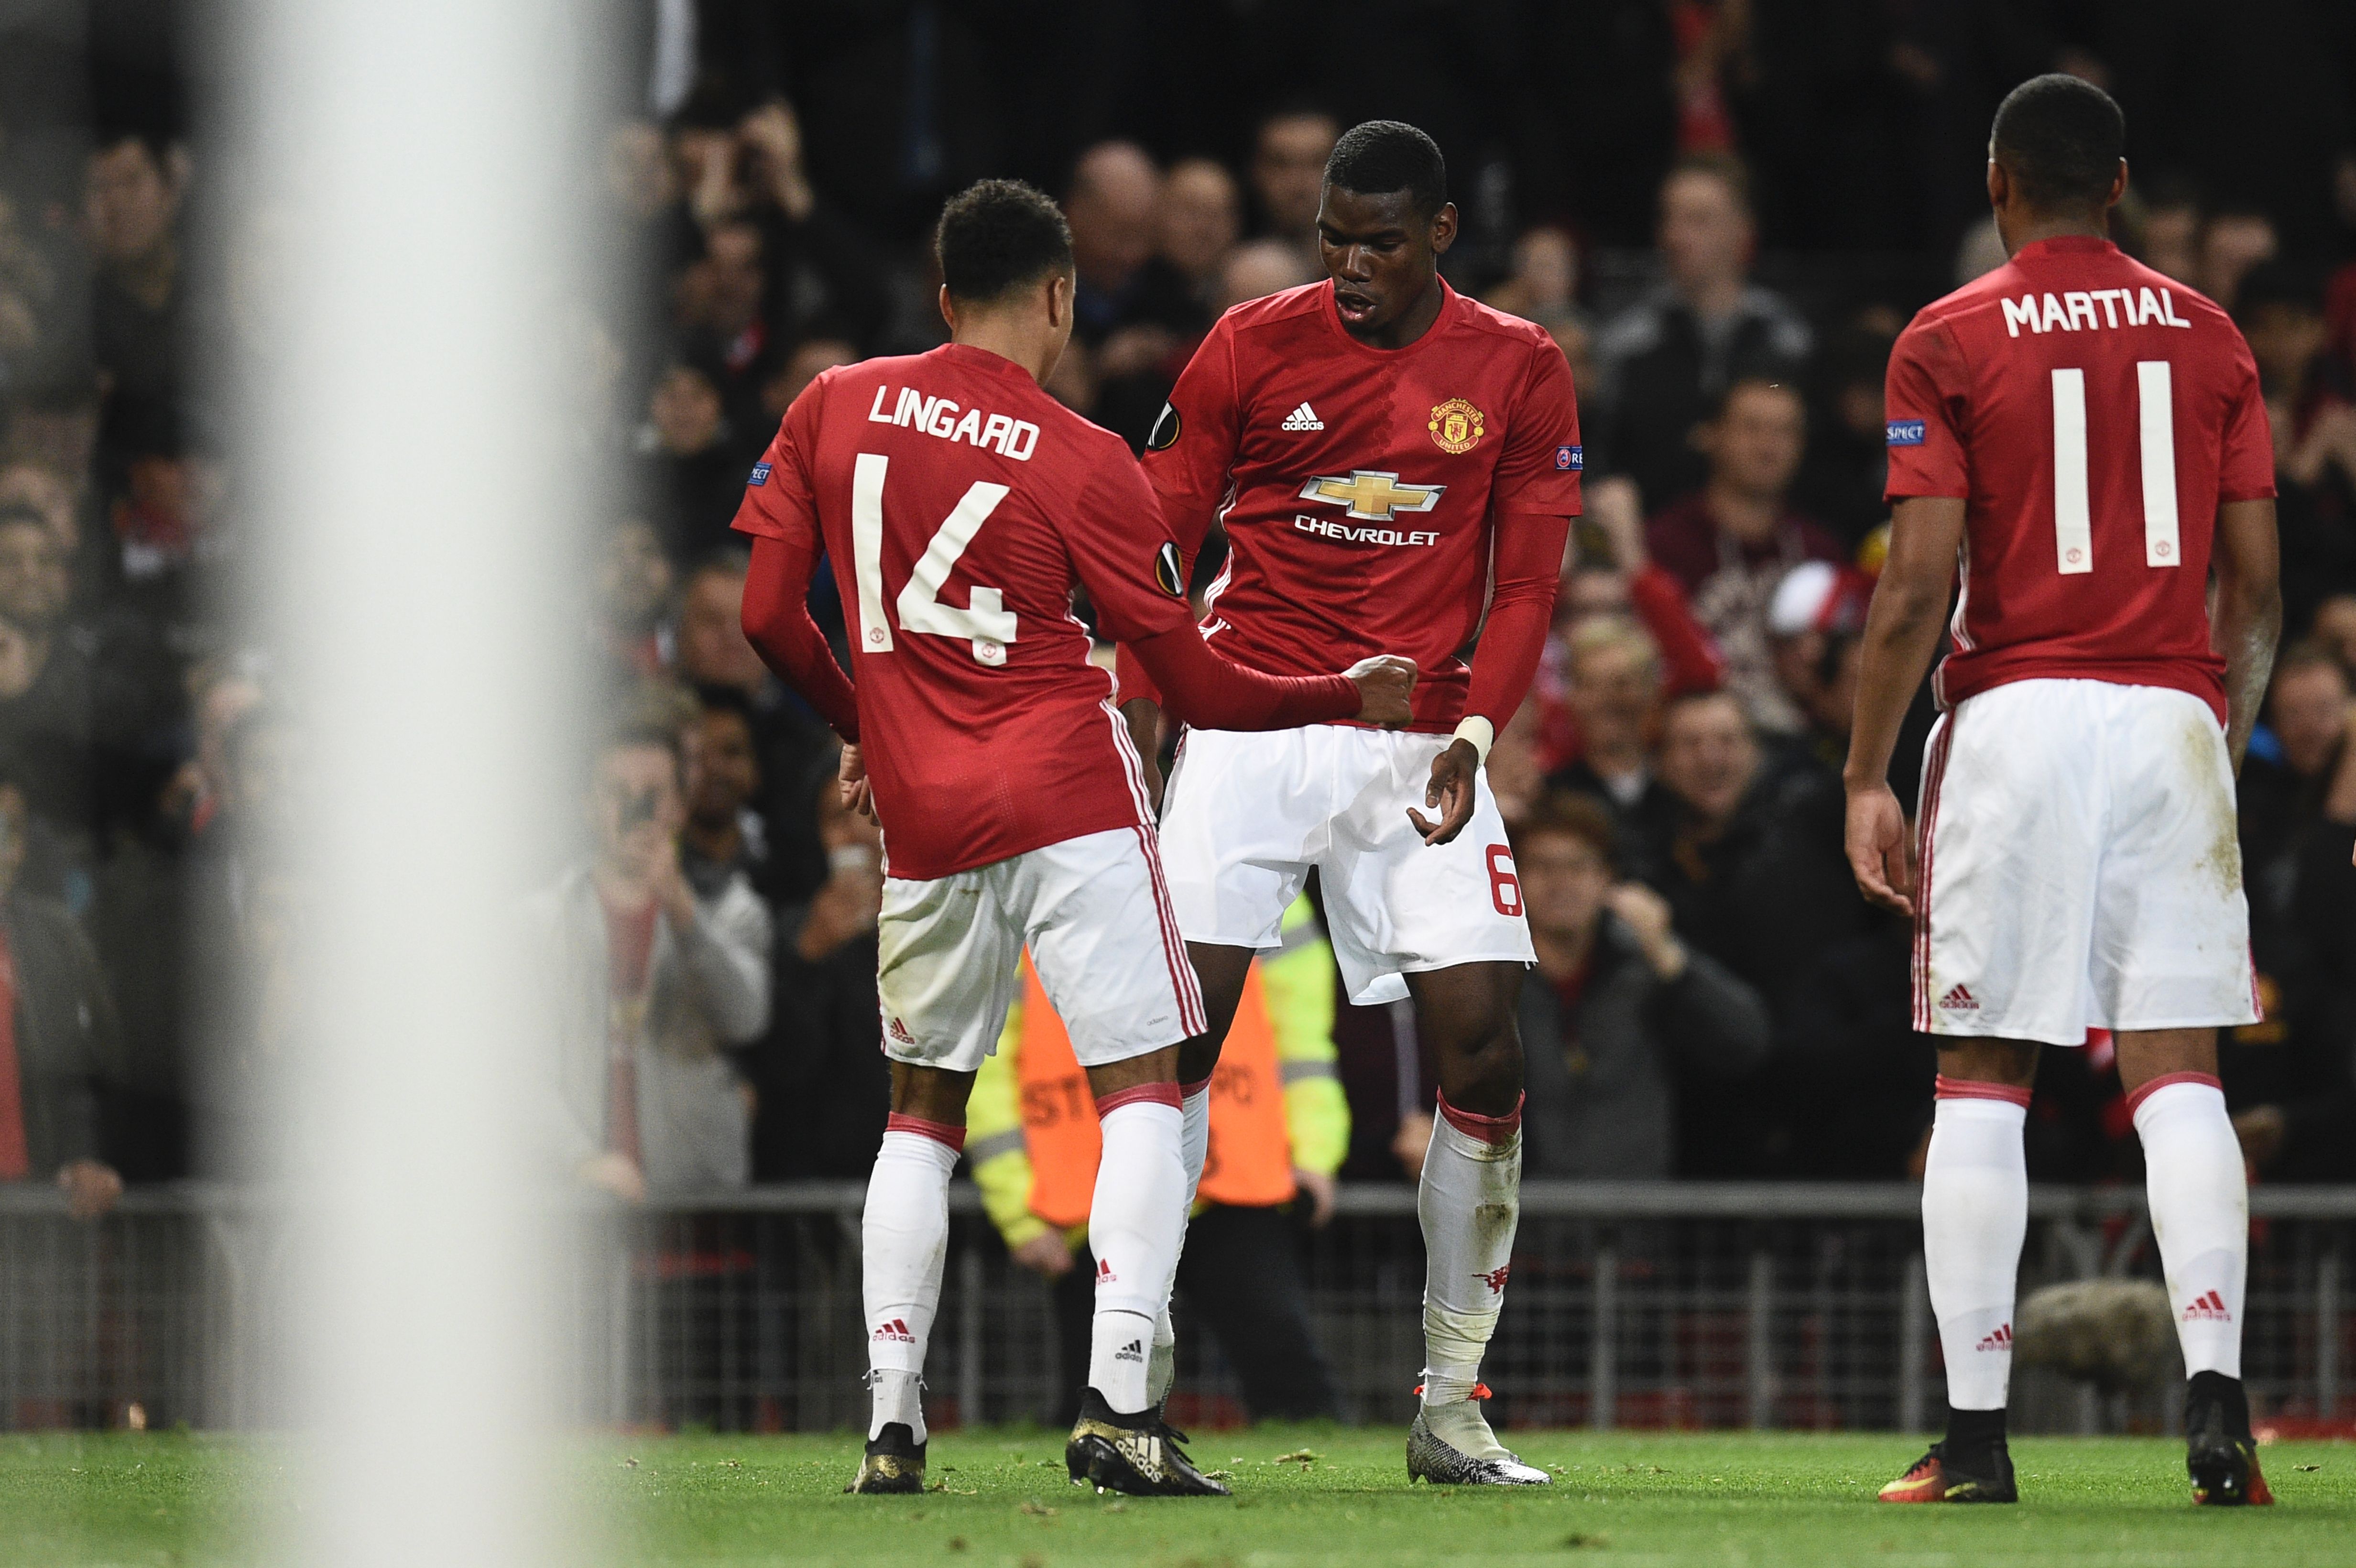 Manchester United's French midfielder Paul Pogba (C) and Manchester United's English midfielder Jesse Lingard (L) do a celebration dance after Pogba scored their third goal during the UEFA Europa League group A football match between Manchester United and Fenerbahce at Old Trafford in Manchester, north west England, on October 20, 2016. / AFP / OLI SCARFF        (Photo credit should read OLI SCARFF/AFP/Getty Images)